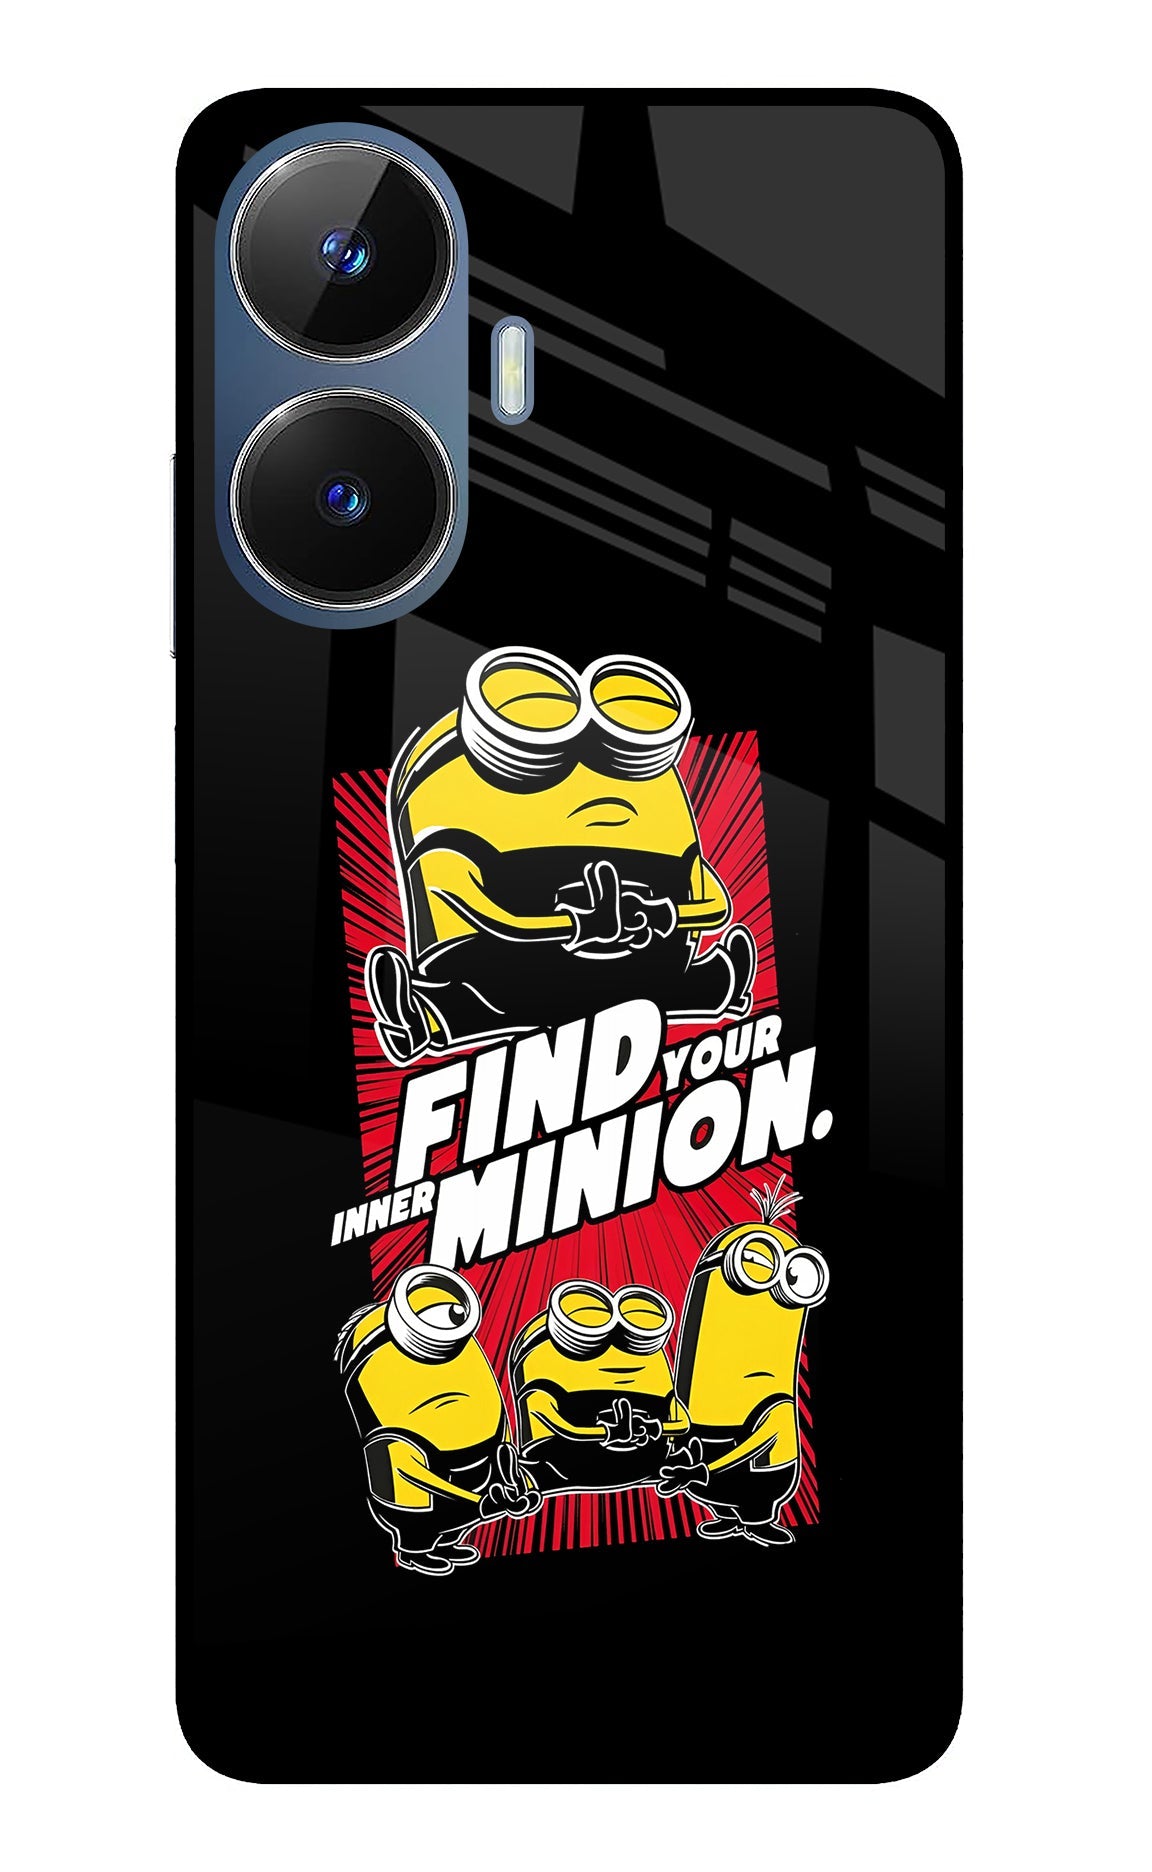 Find your inner Minion Realme C55/N55 Back Cover